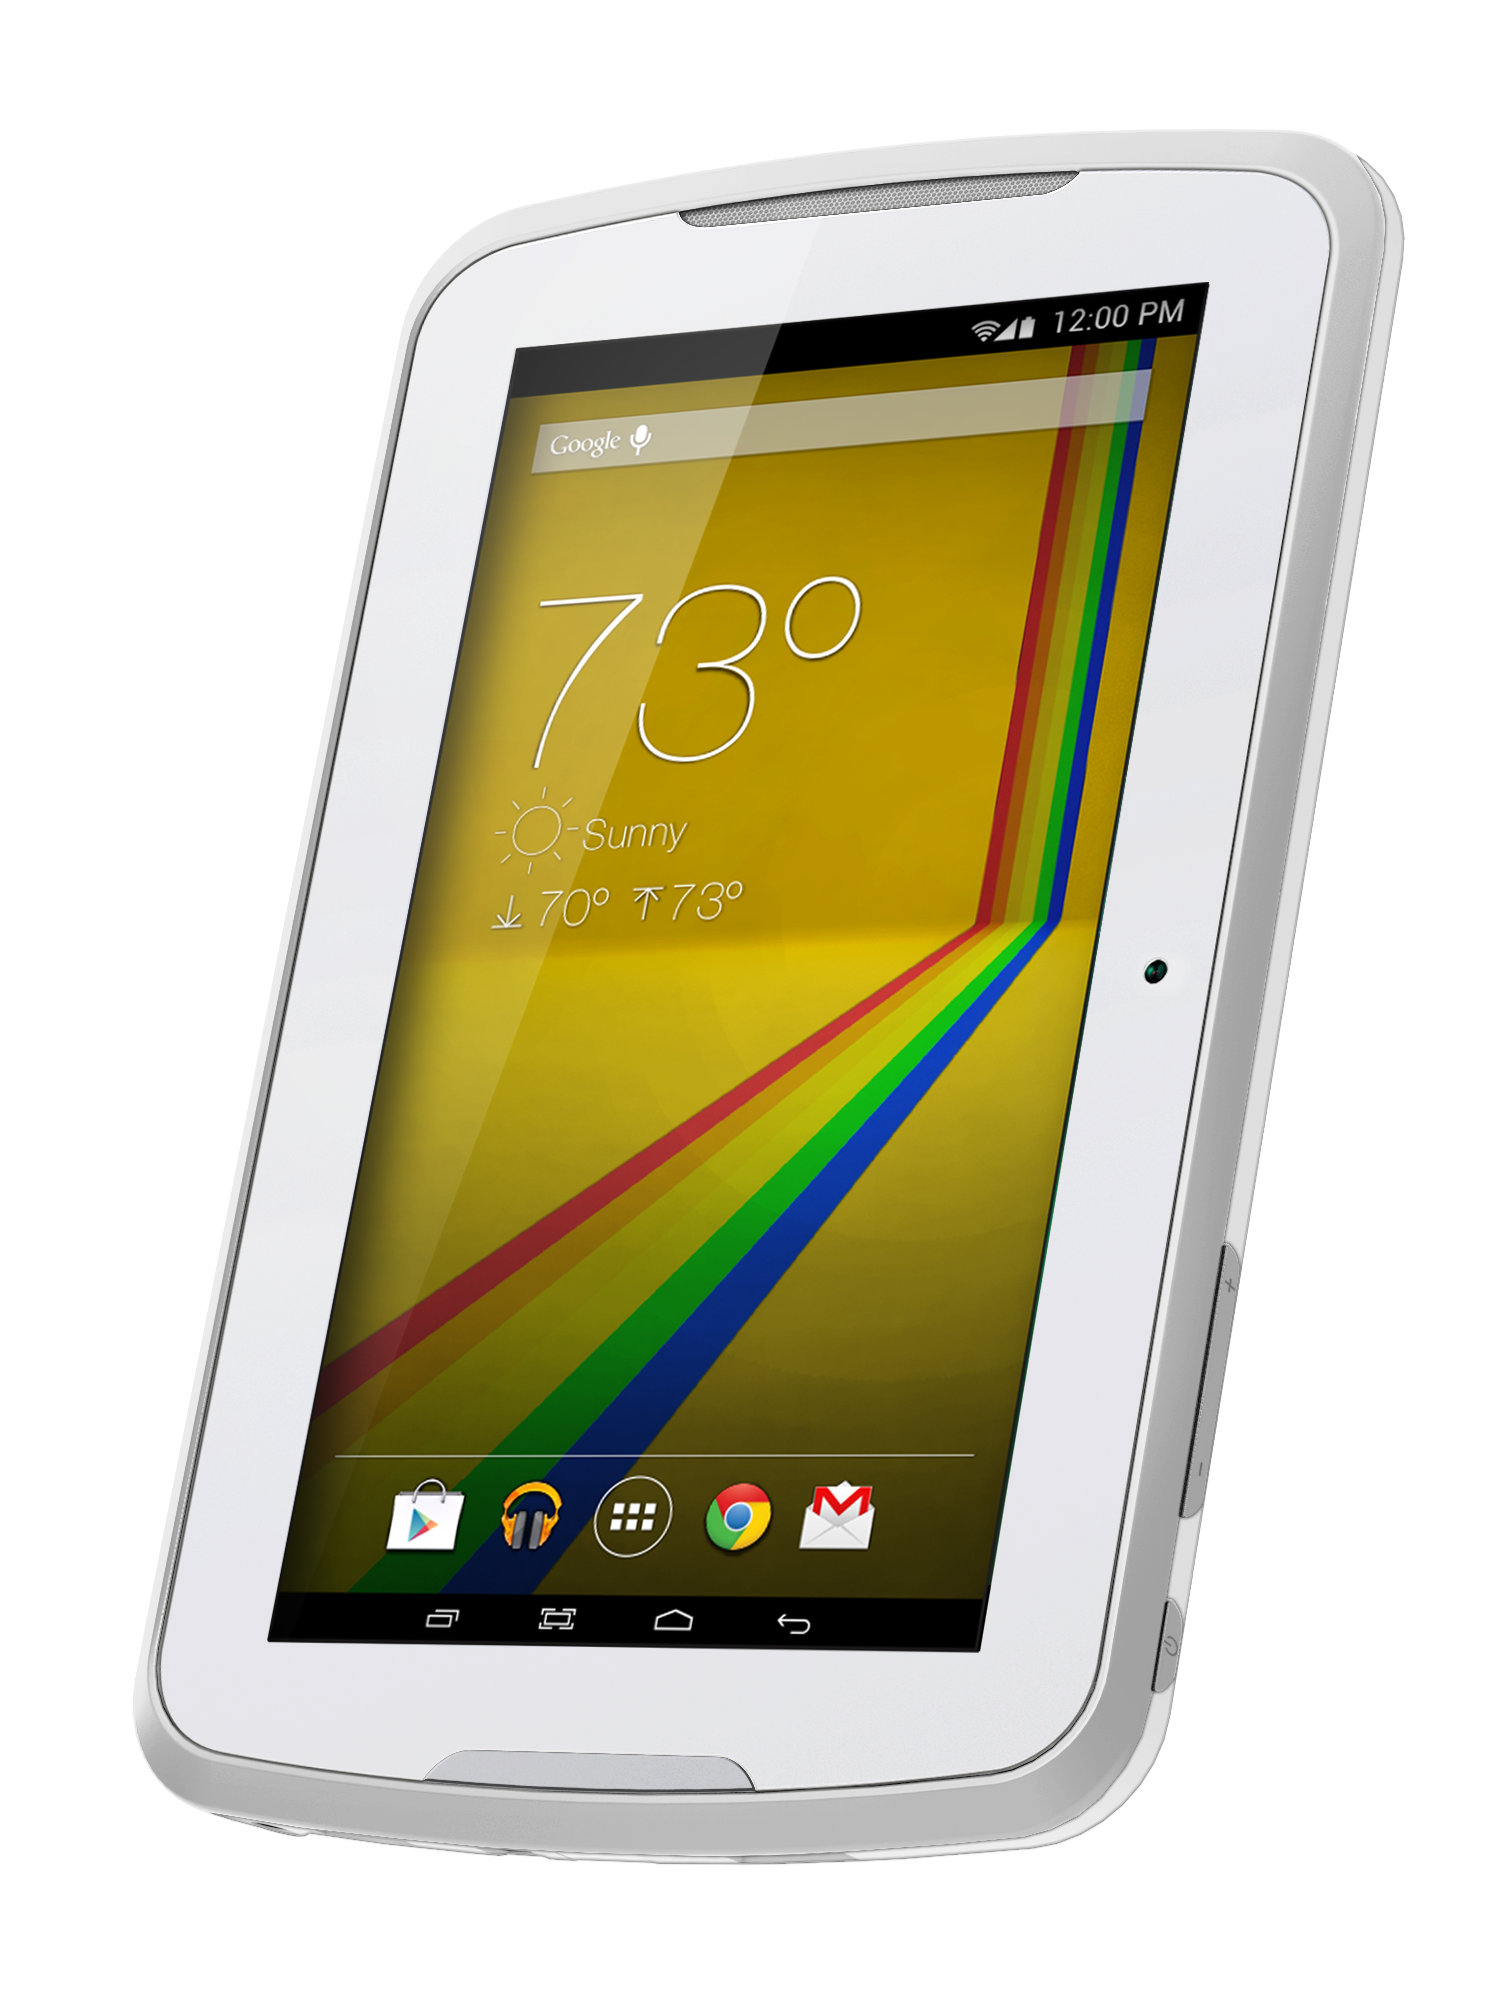 7" Polaroid Q Series Tablet Launching at CES2014